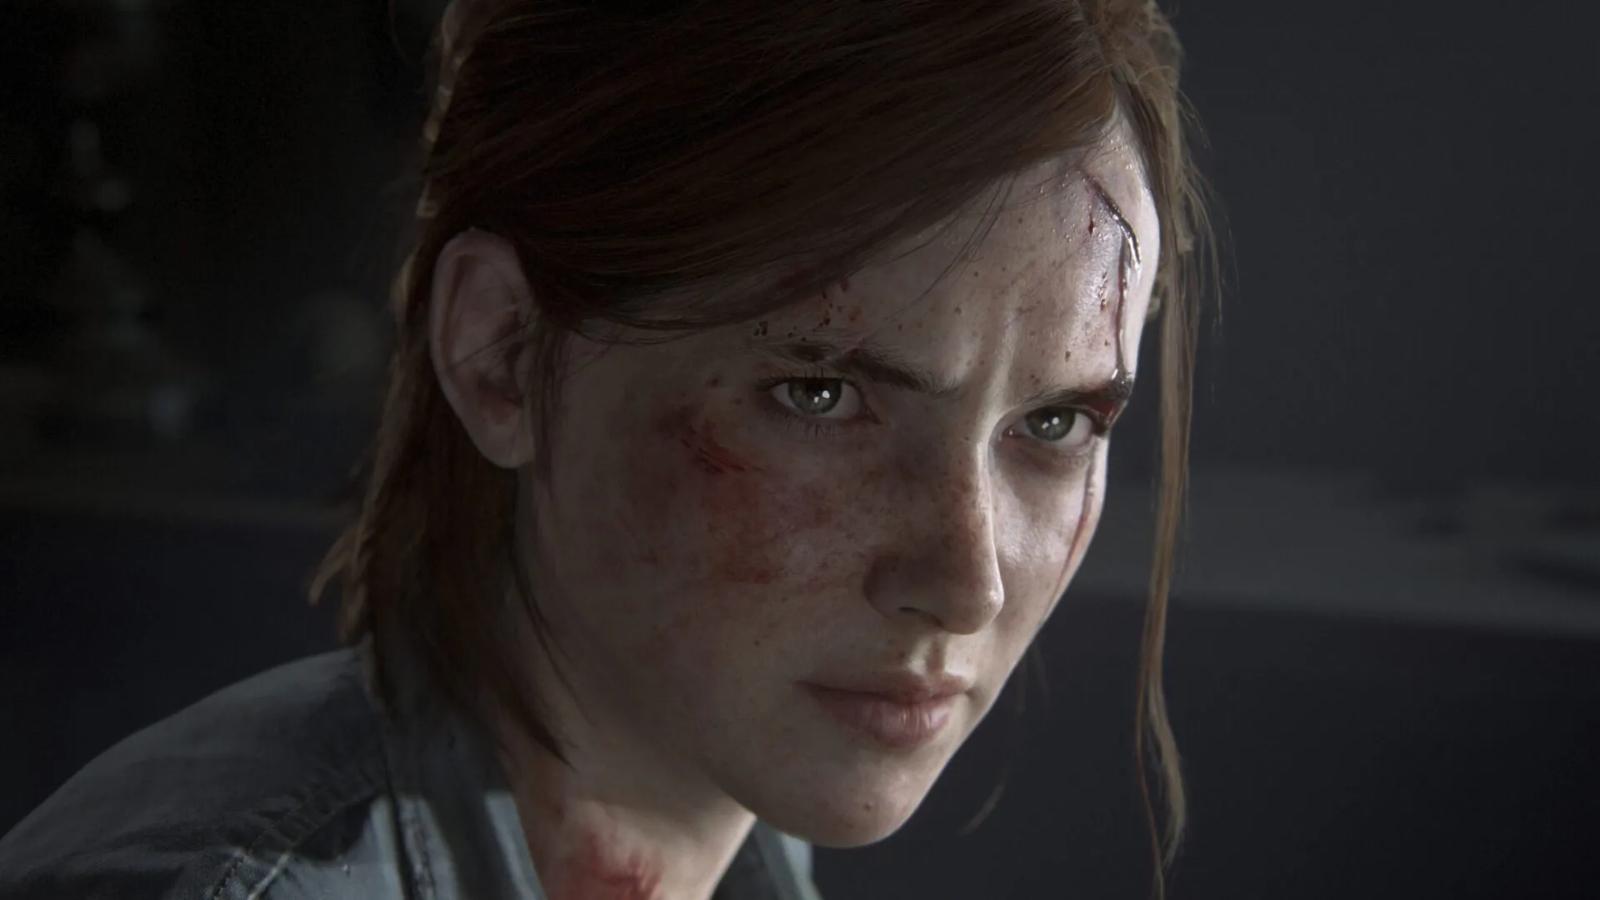 TLOU fans claim Part 2 remastered is “identical” to original despite PS5  graphics - Dexerto